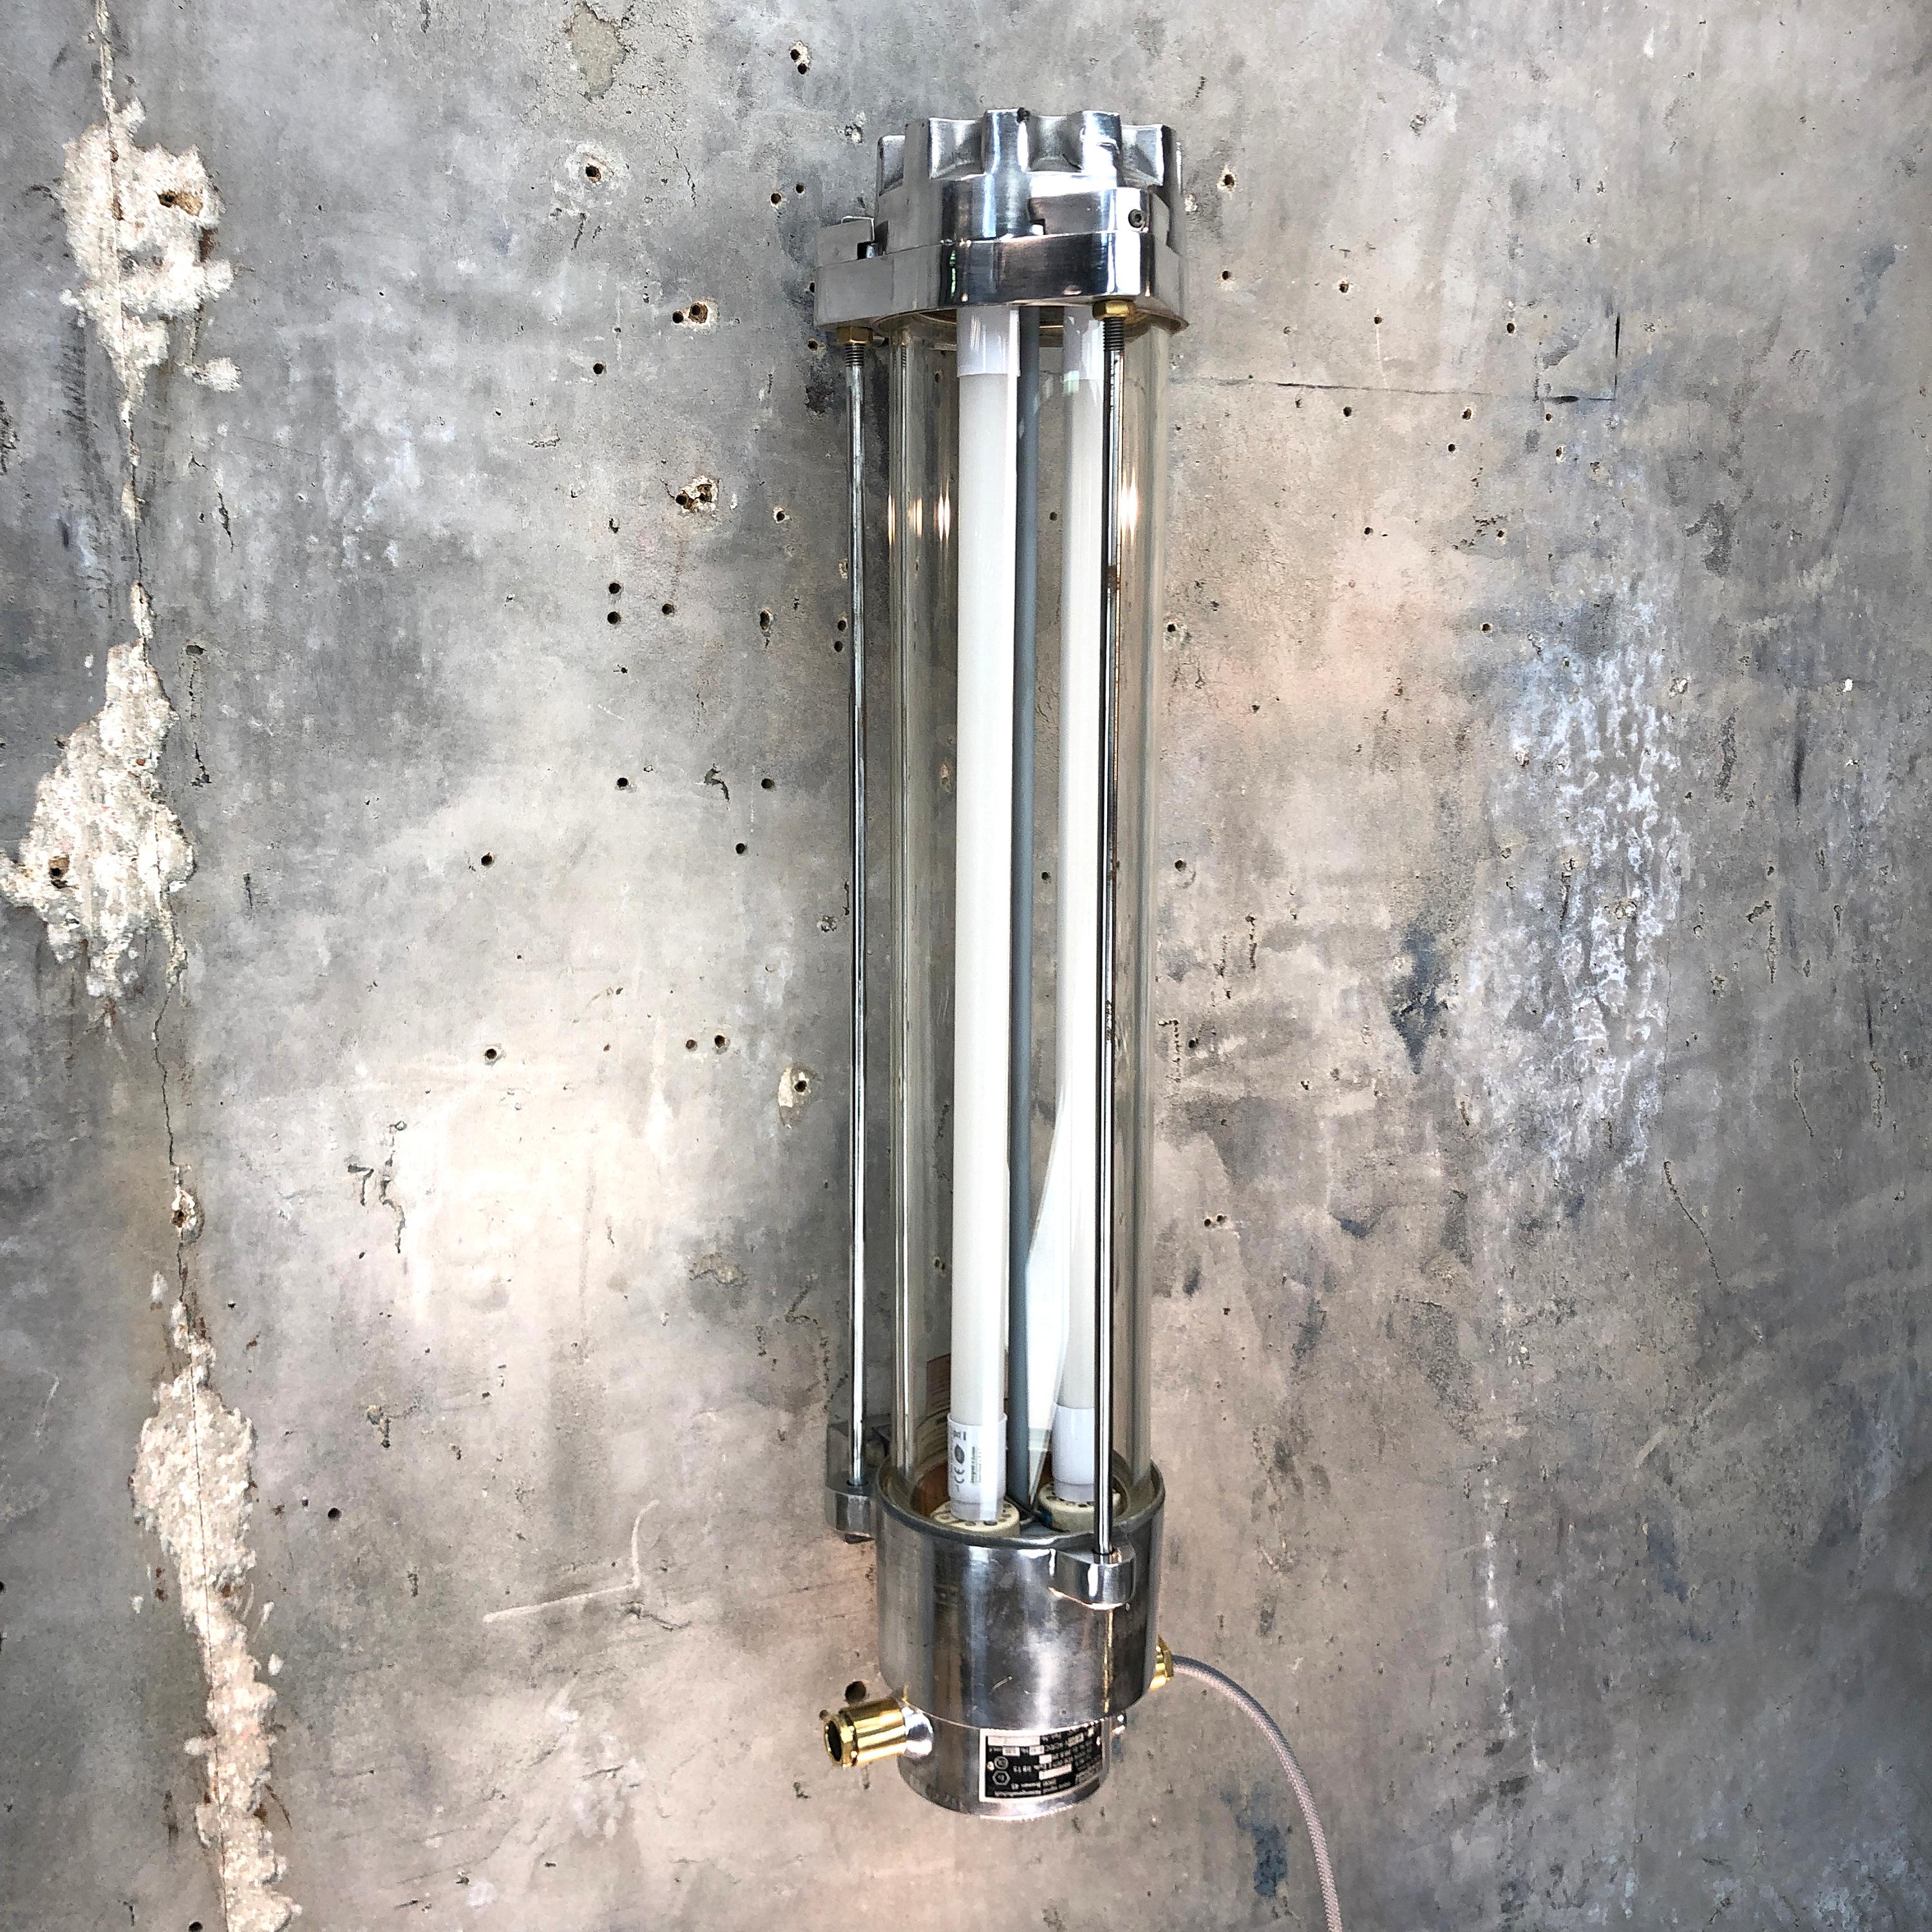 A retro industrial aluminium wall-mounted German explosion proof striplight by Wittenberg. Reclaimed from supertankers and military vessels then professionally stripped and refinished in the UK by Loomlight.

This fixture is supplied with a 12